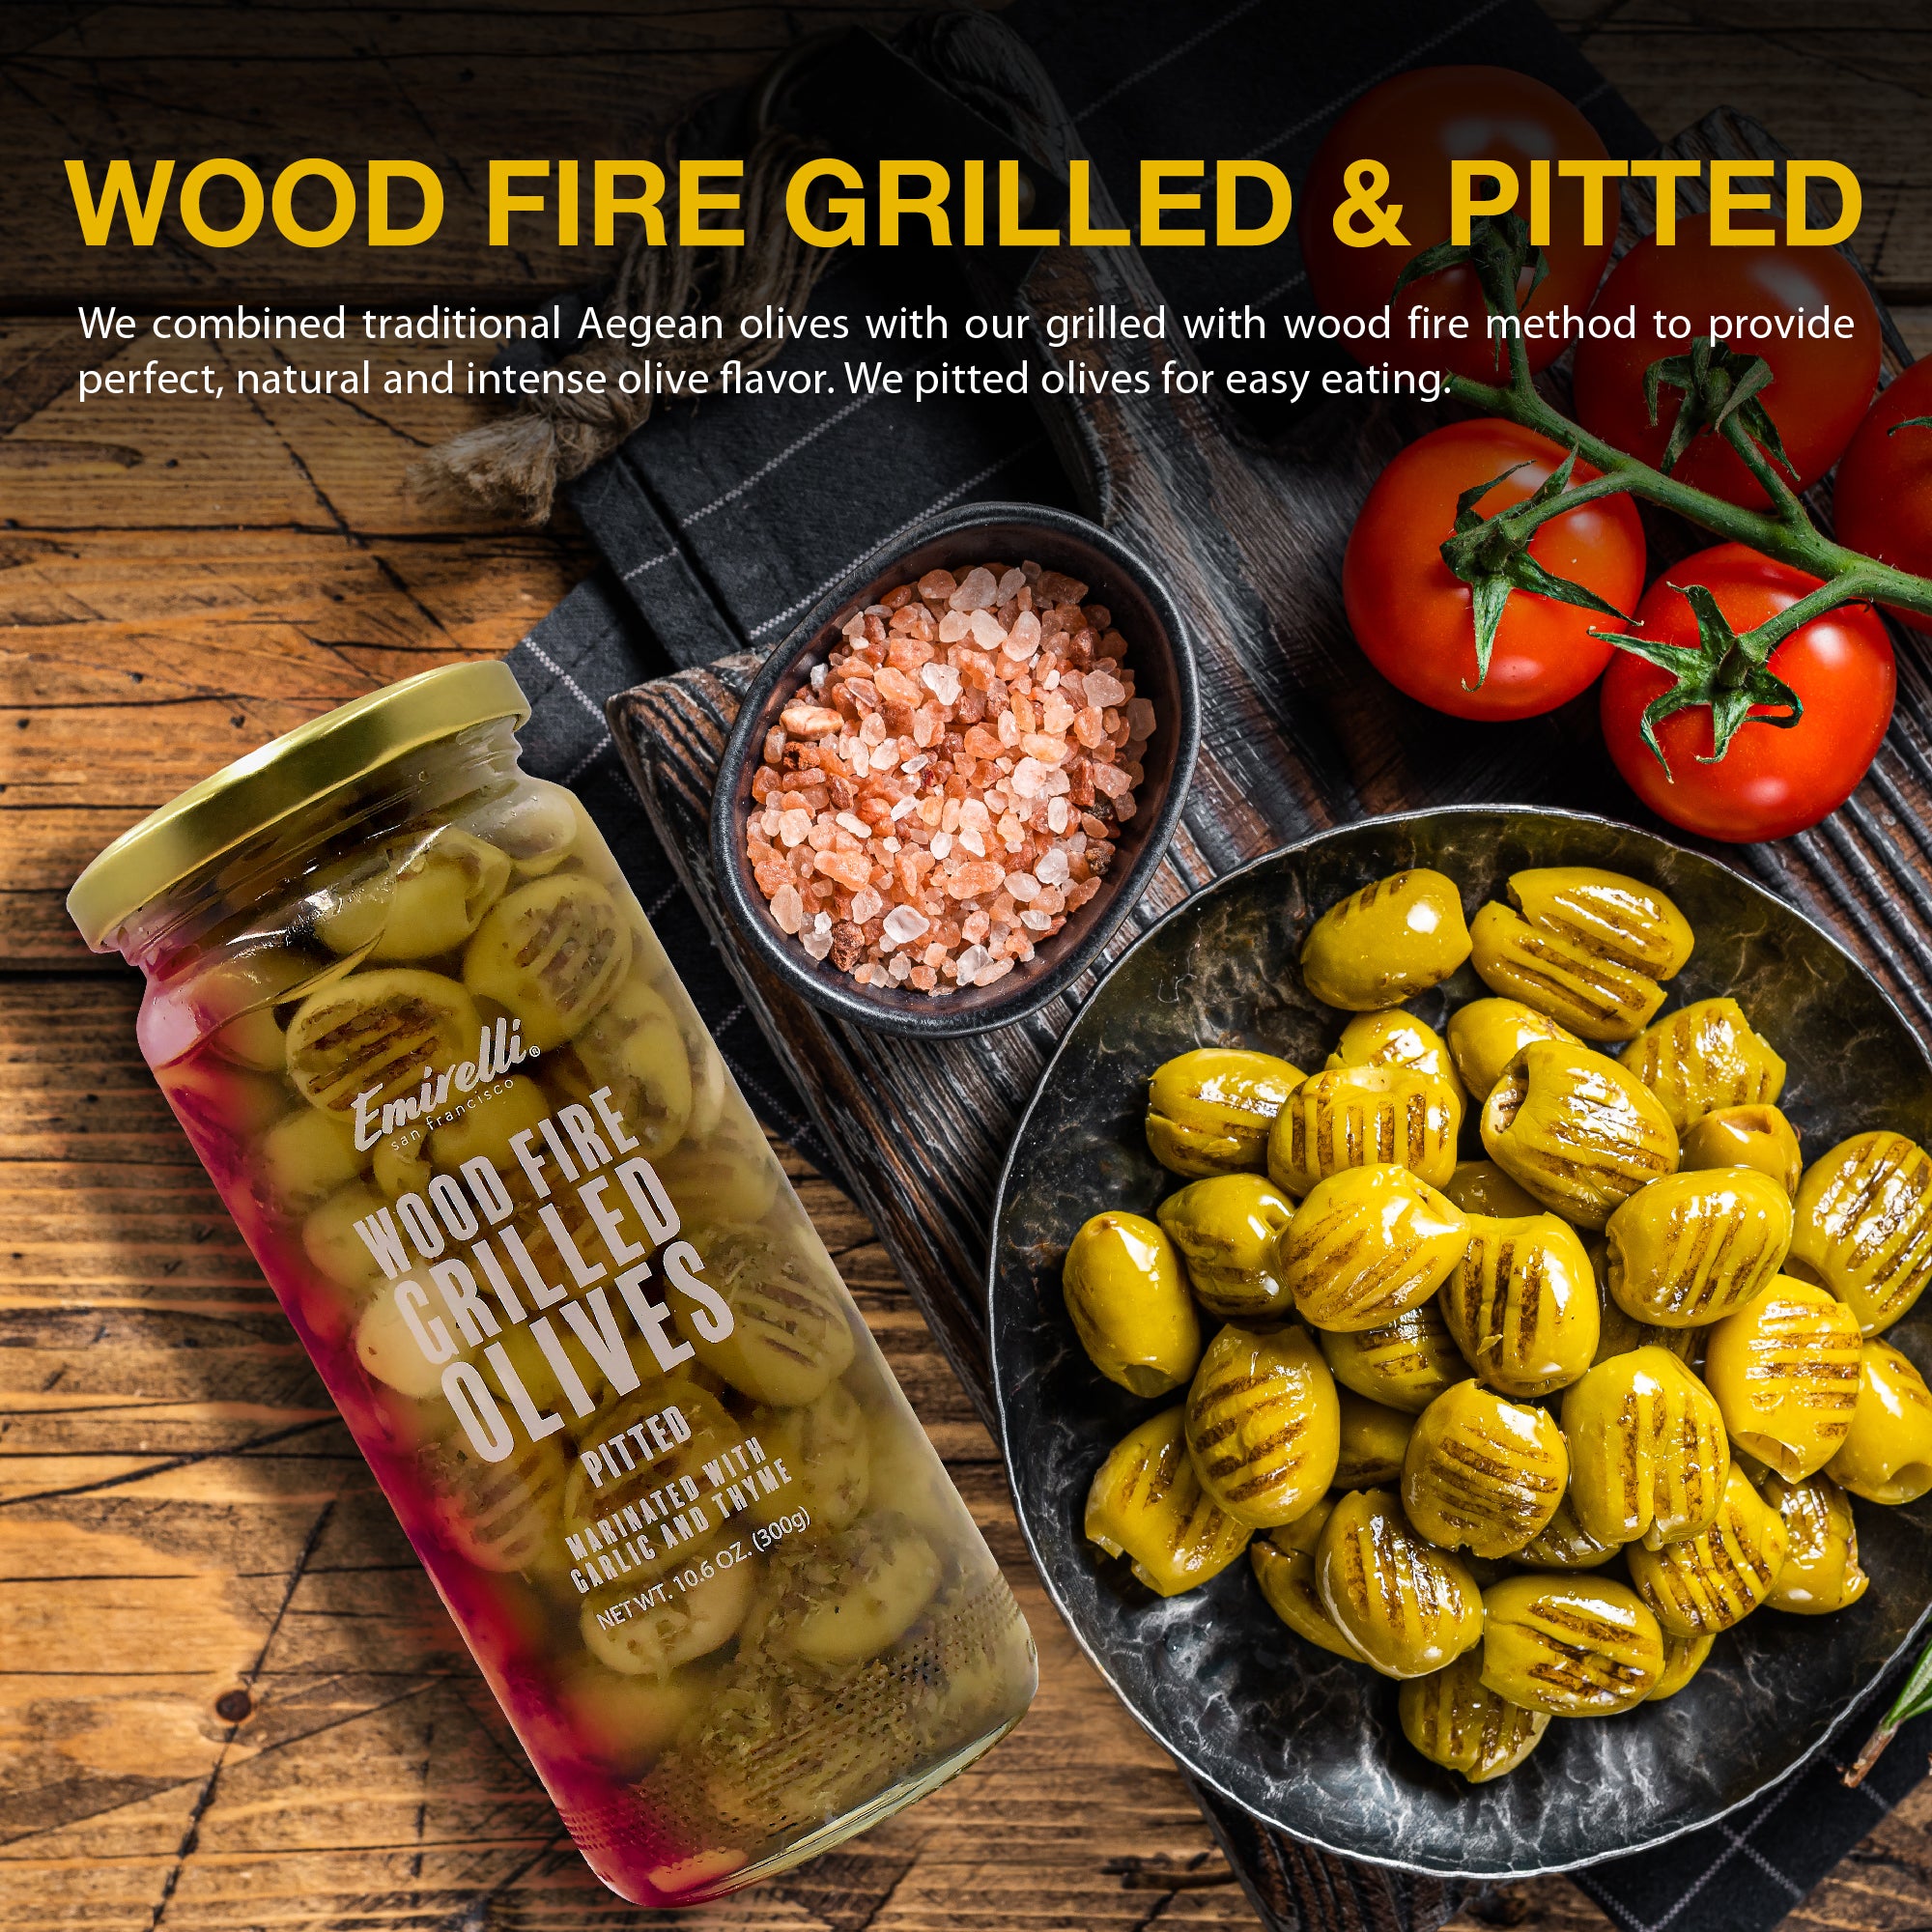 5 Delicious Ways to Enjoy Wood Fire Grilled Olives